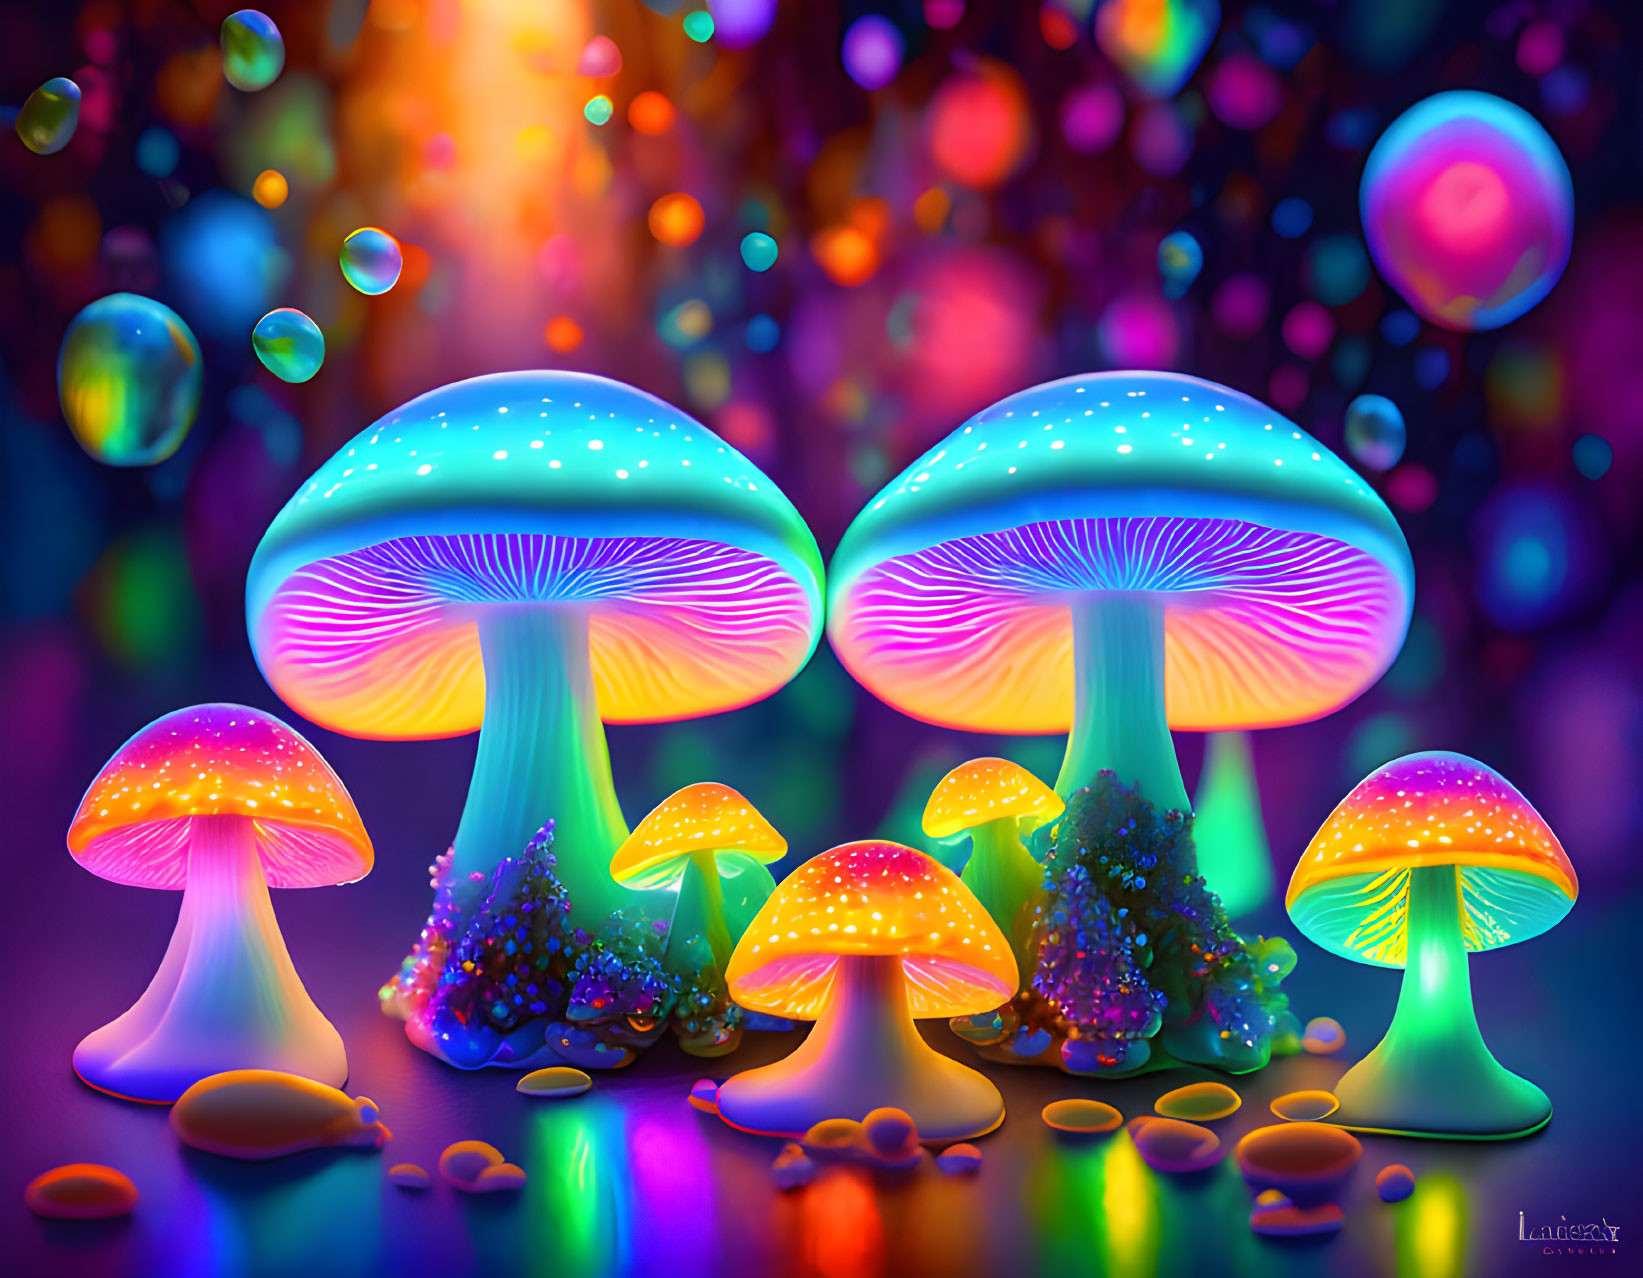 Colorful Mushroom Illustration with Magical Elements and Bokeh Background